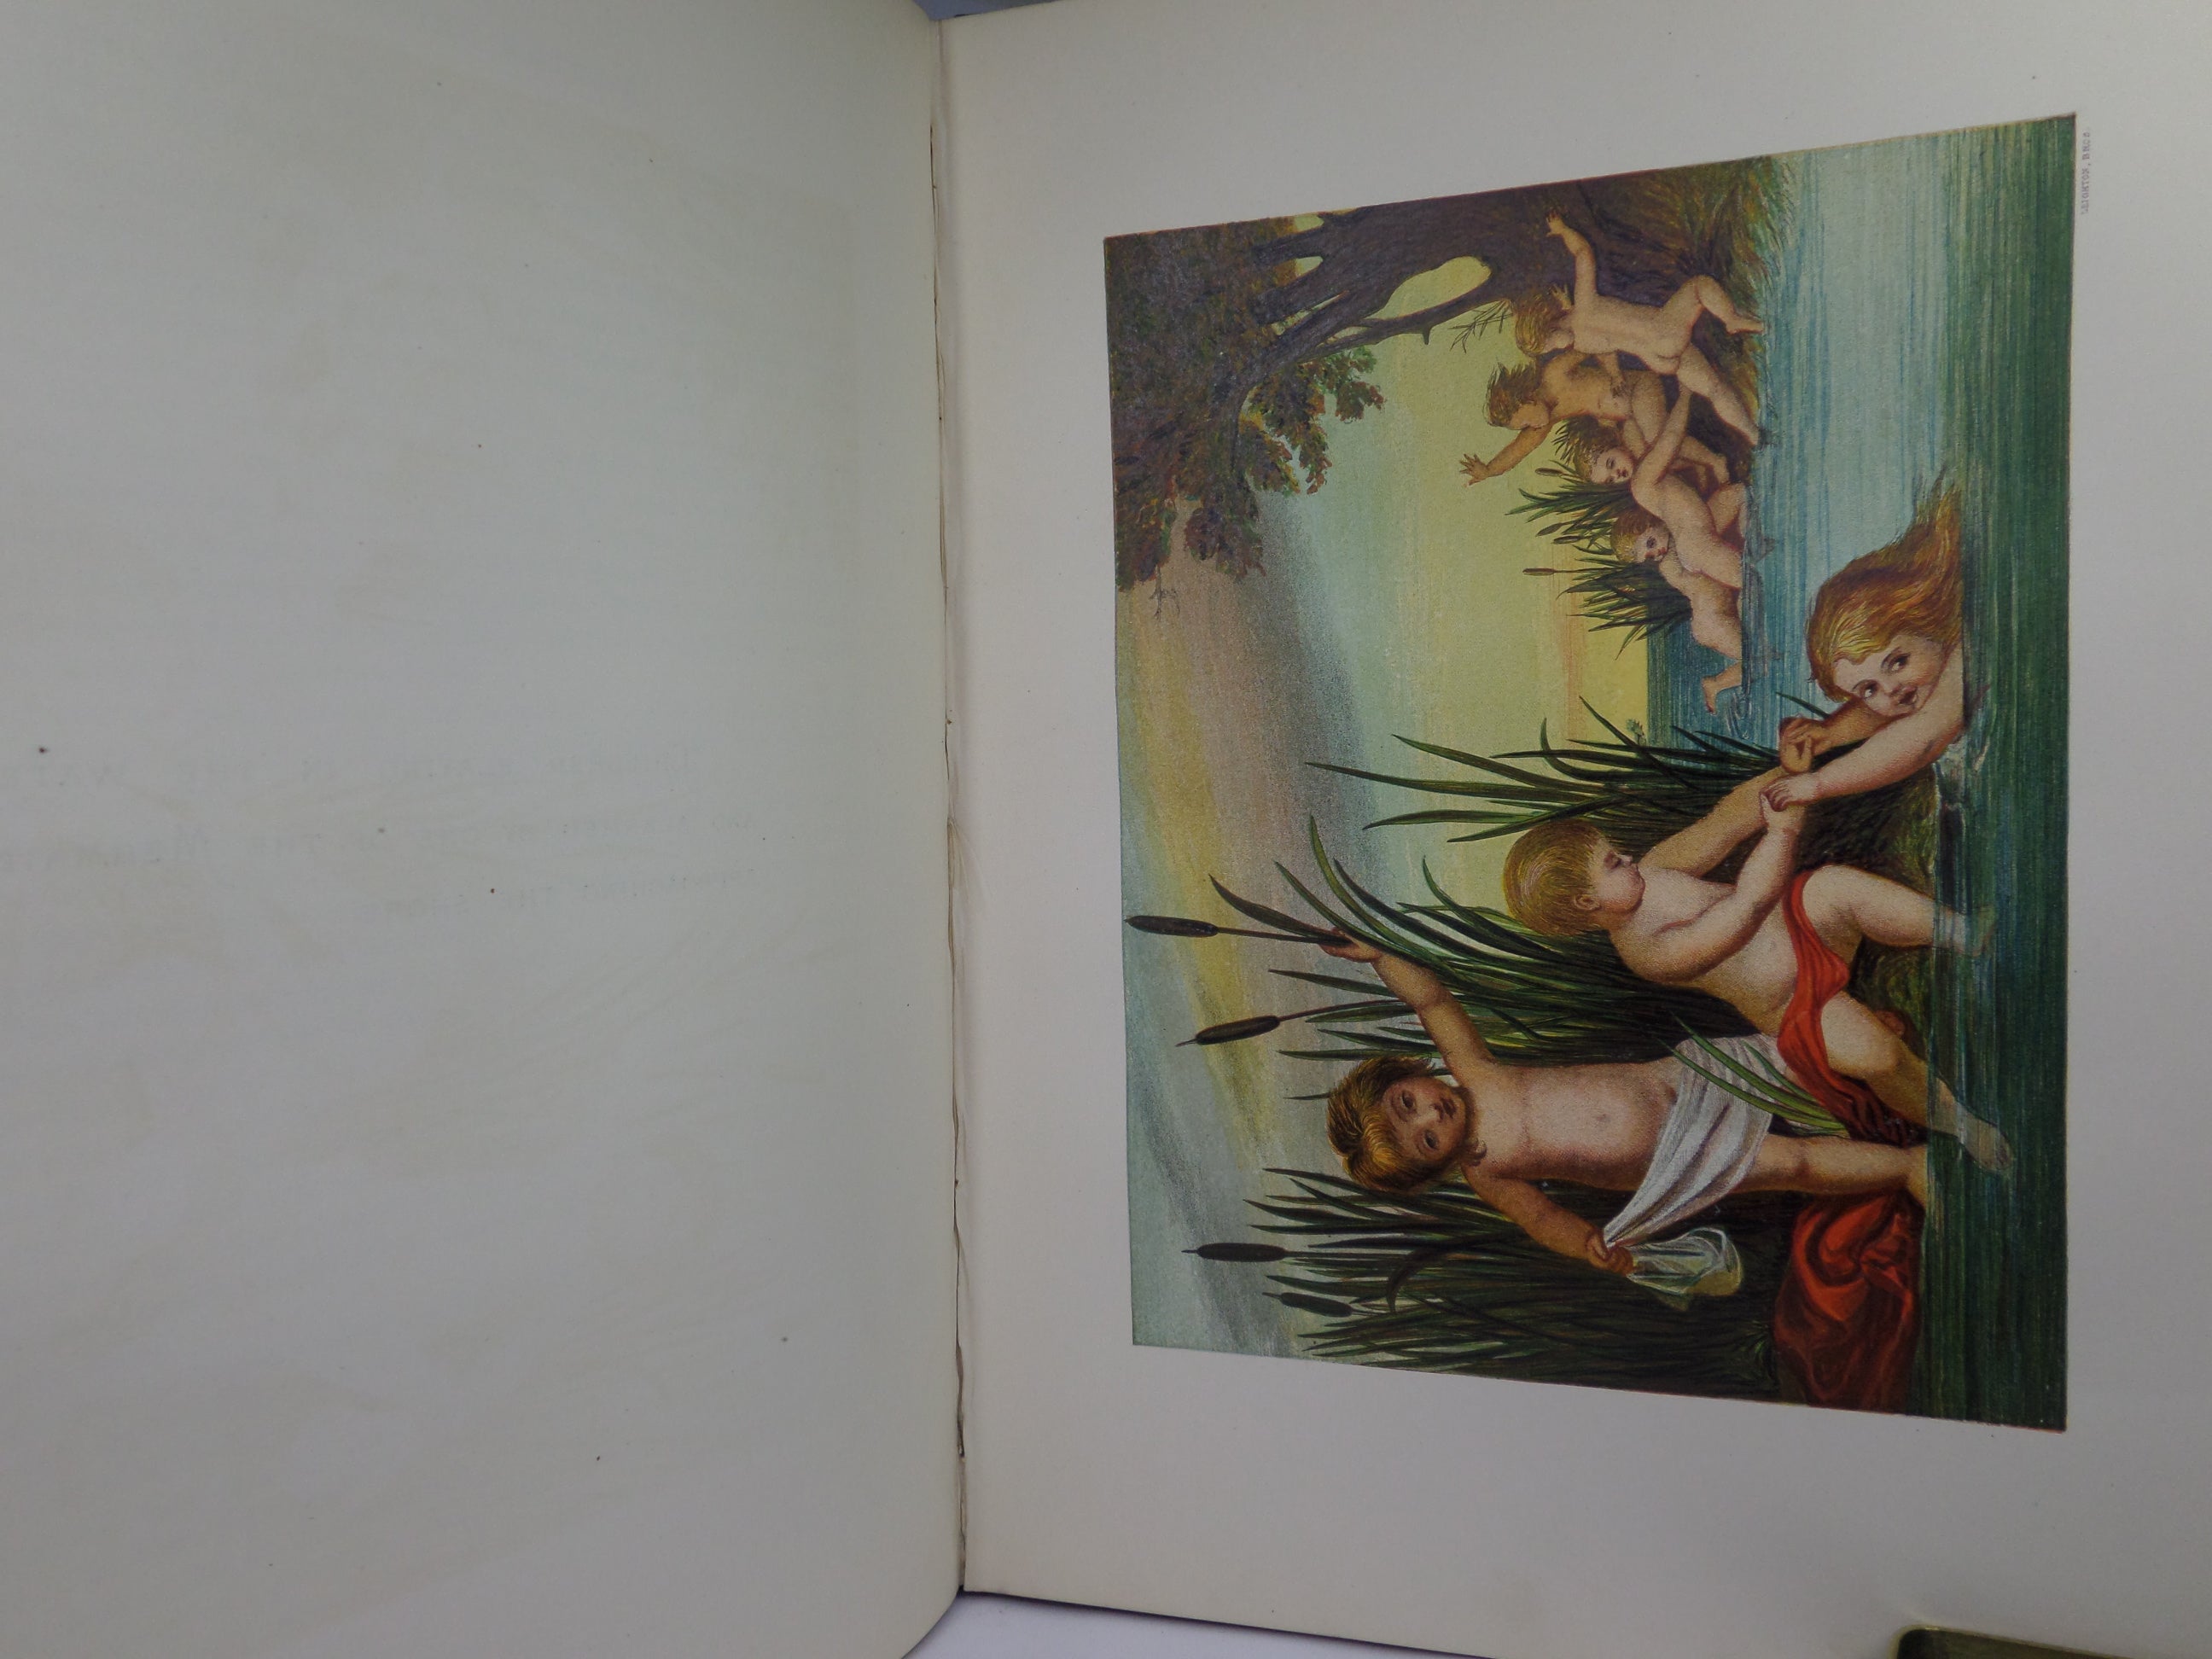 FAIRY TALES BY HANS CHRISTIAN ANDERSEN 1872 ILLUSTRATED BY ELEANOR VERE BOYLE